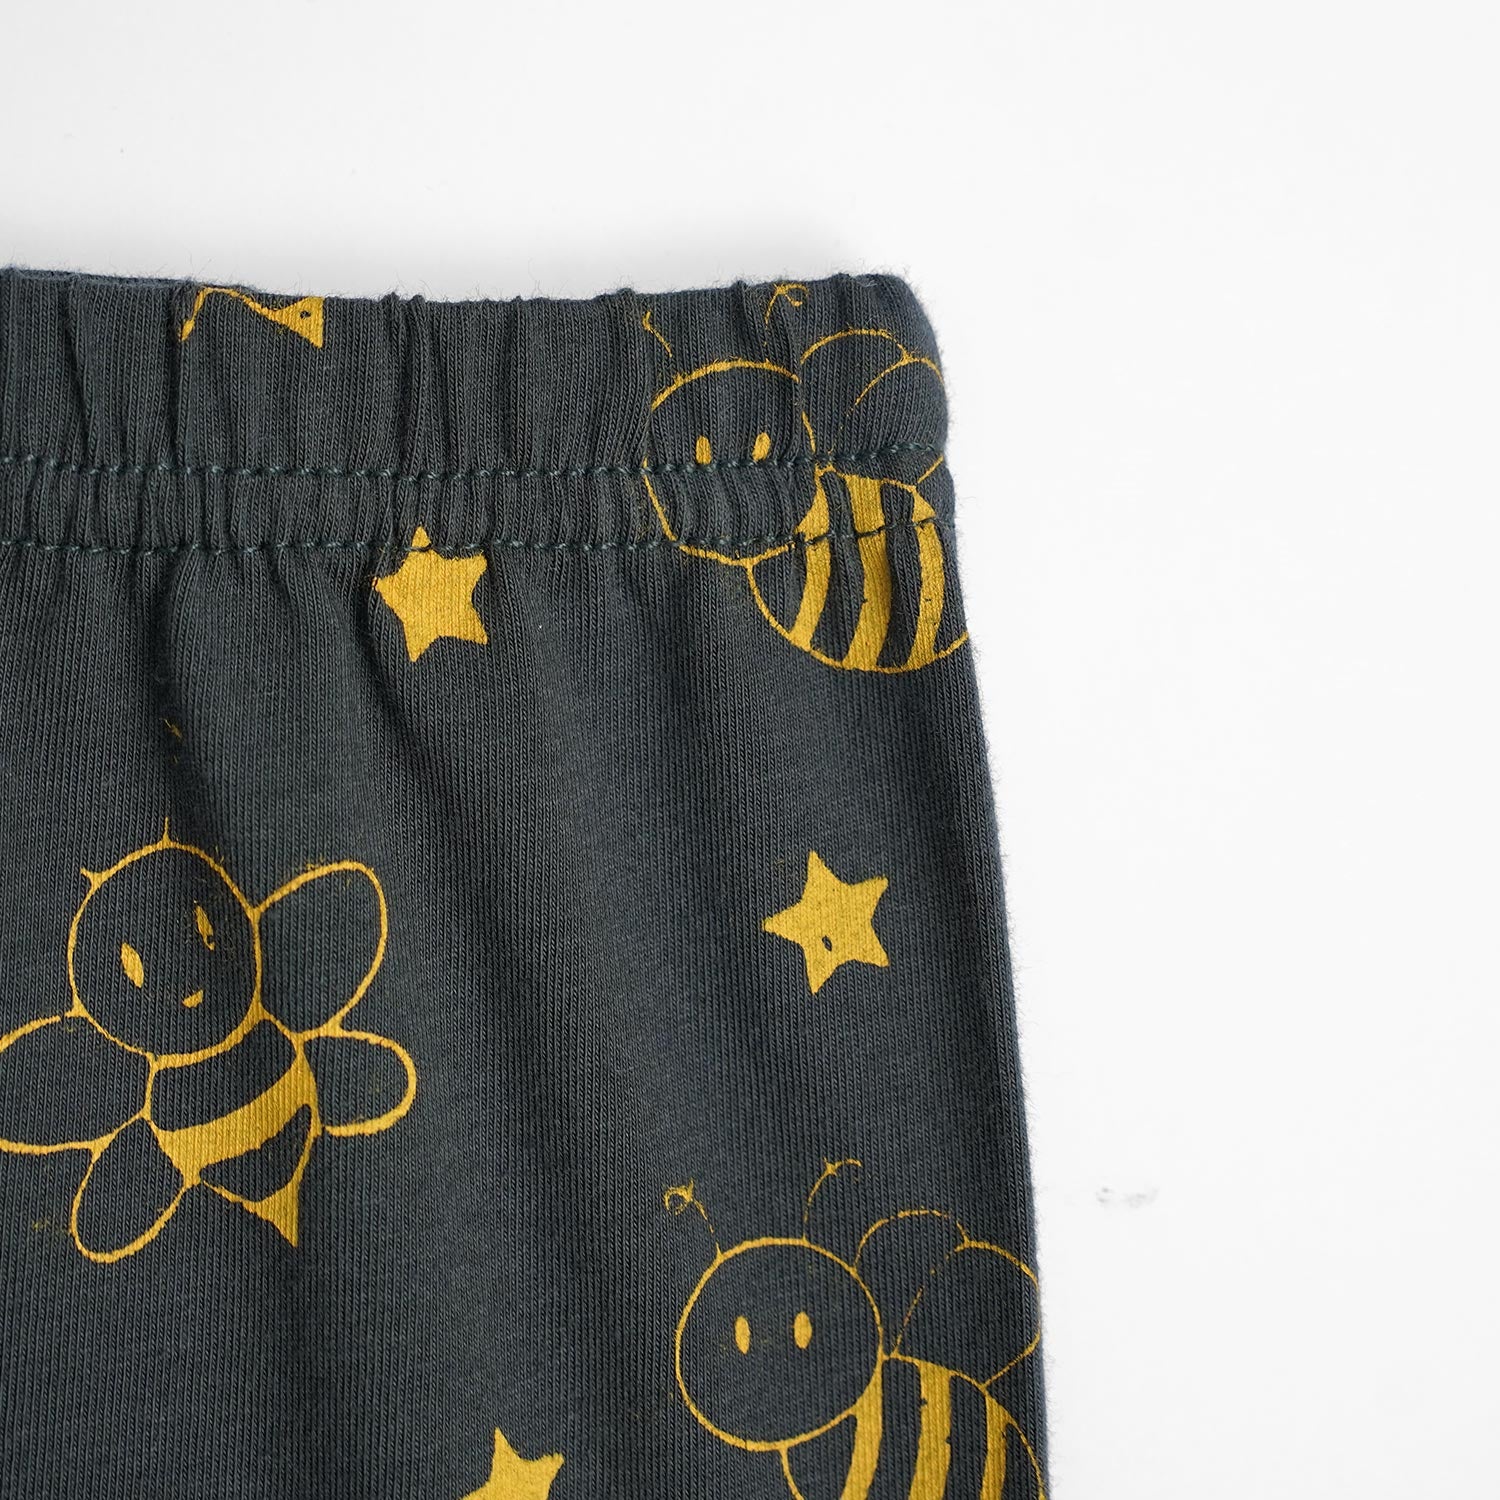 Cotton Rich Charcoal  Allover Honey Bee Printed Leggings